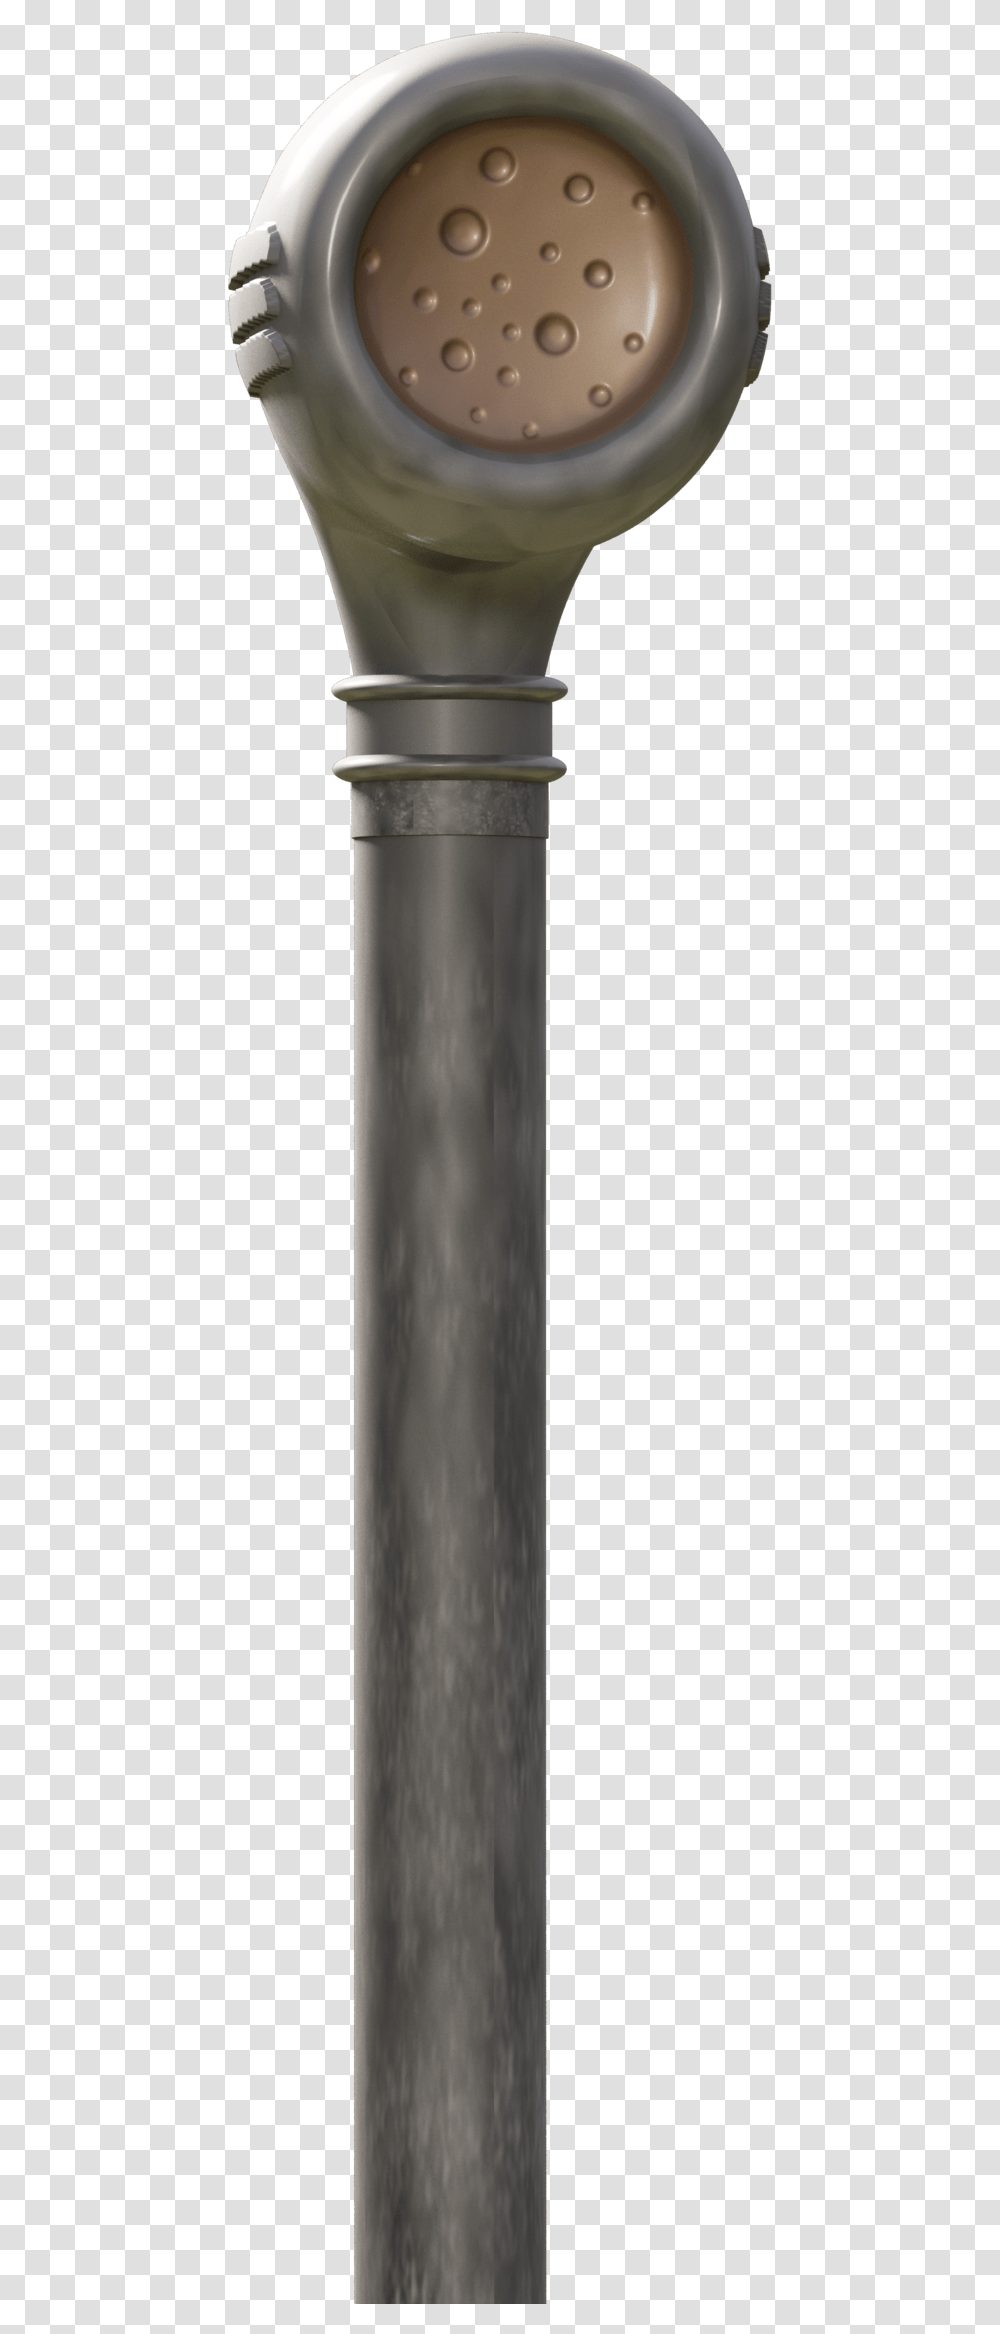 Voice Trumpet On Background Real Teletubbies Voice Trumpet, Sword, Blade, Weapon, Weaponry Transparent Png